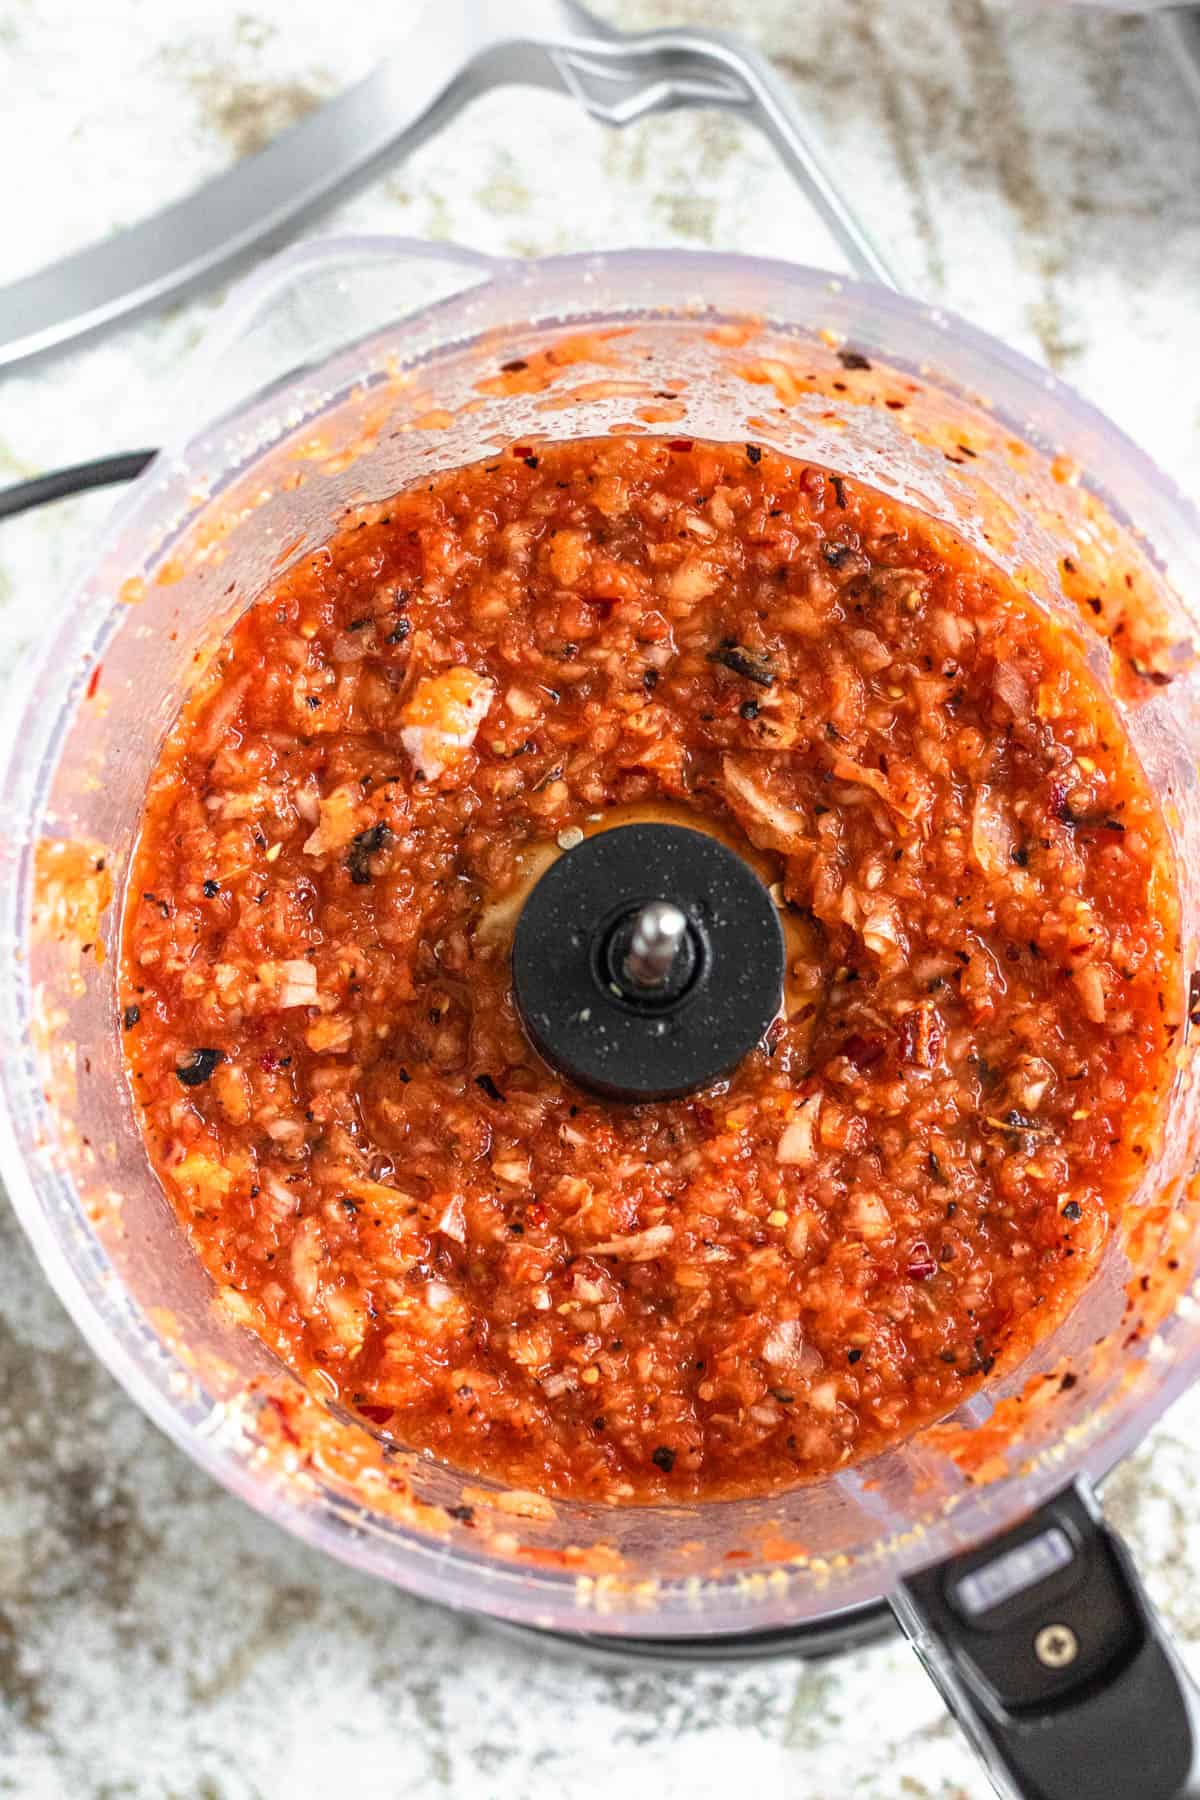 Blended tomatoes and onions in a food processor